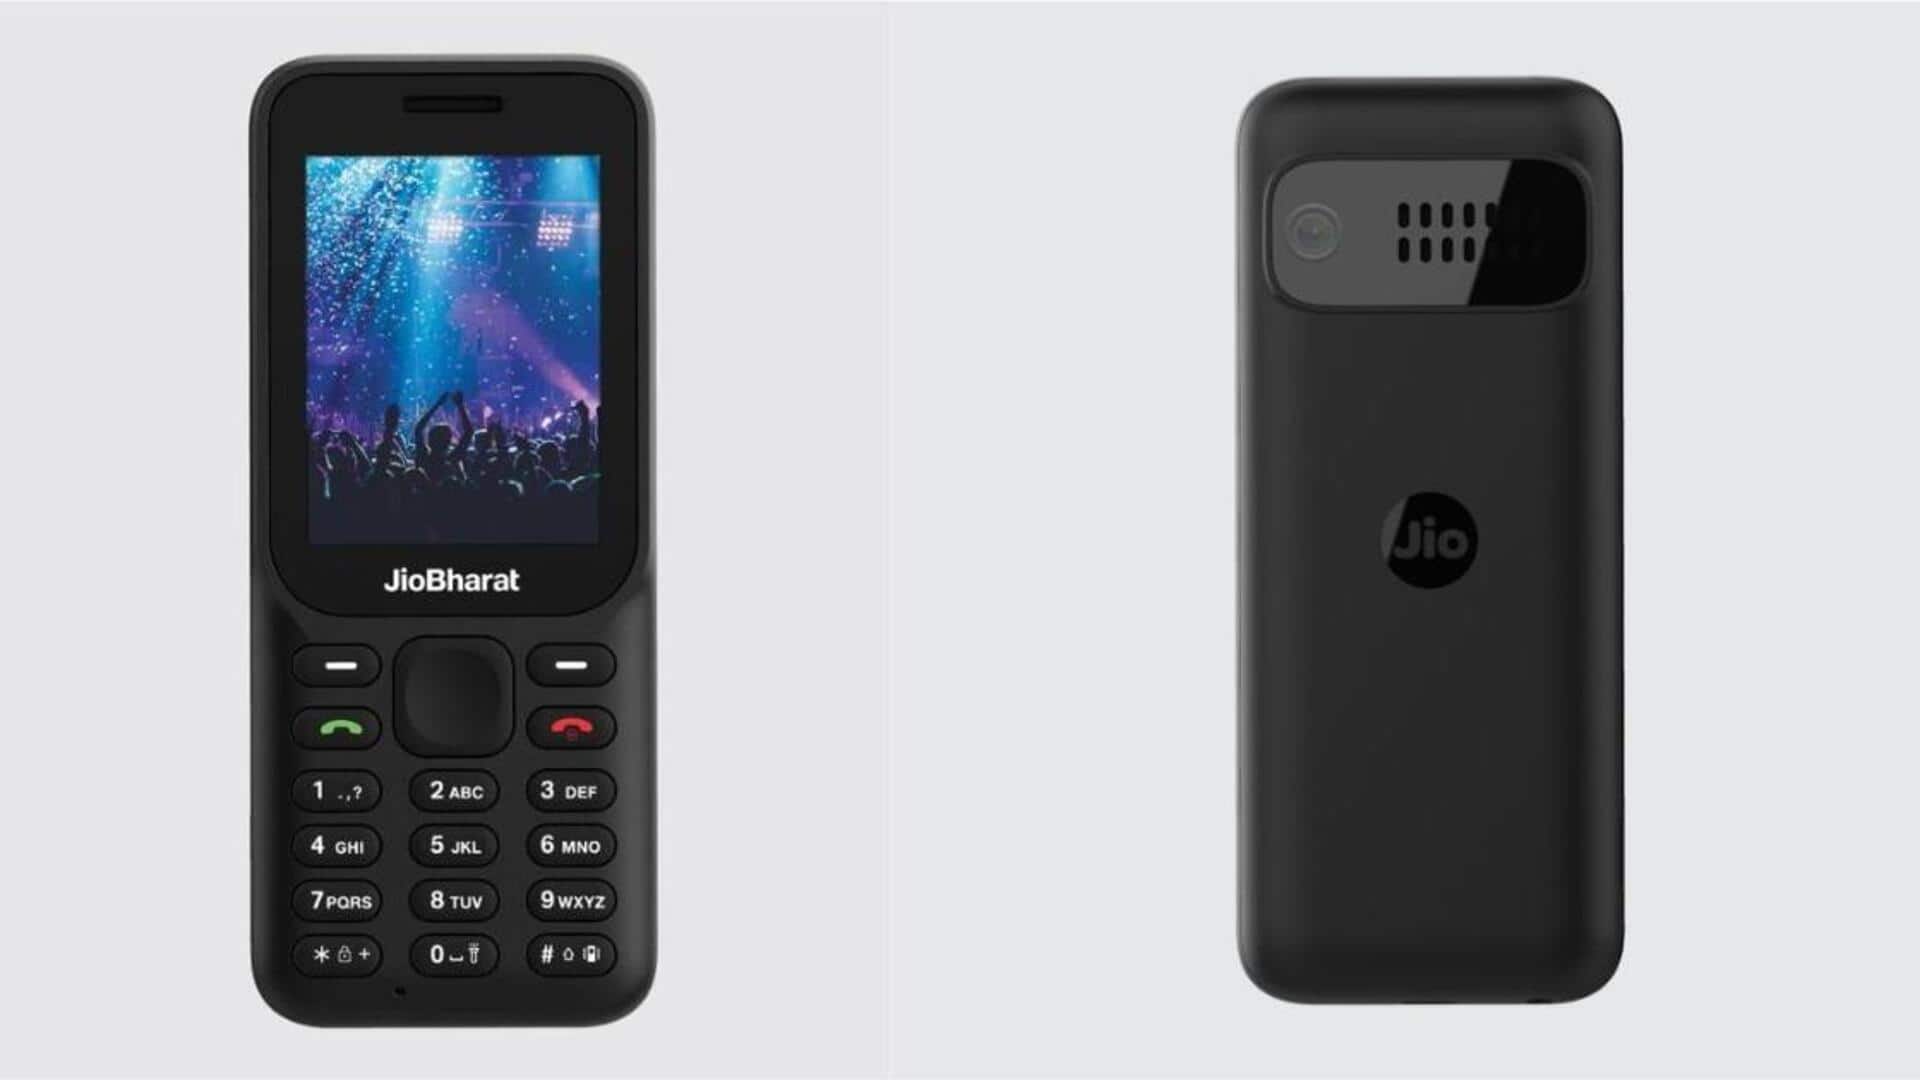 JioBharat B1 4G feature phone launched at Rs. 1,300